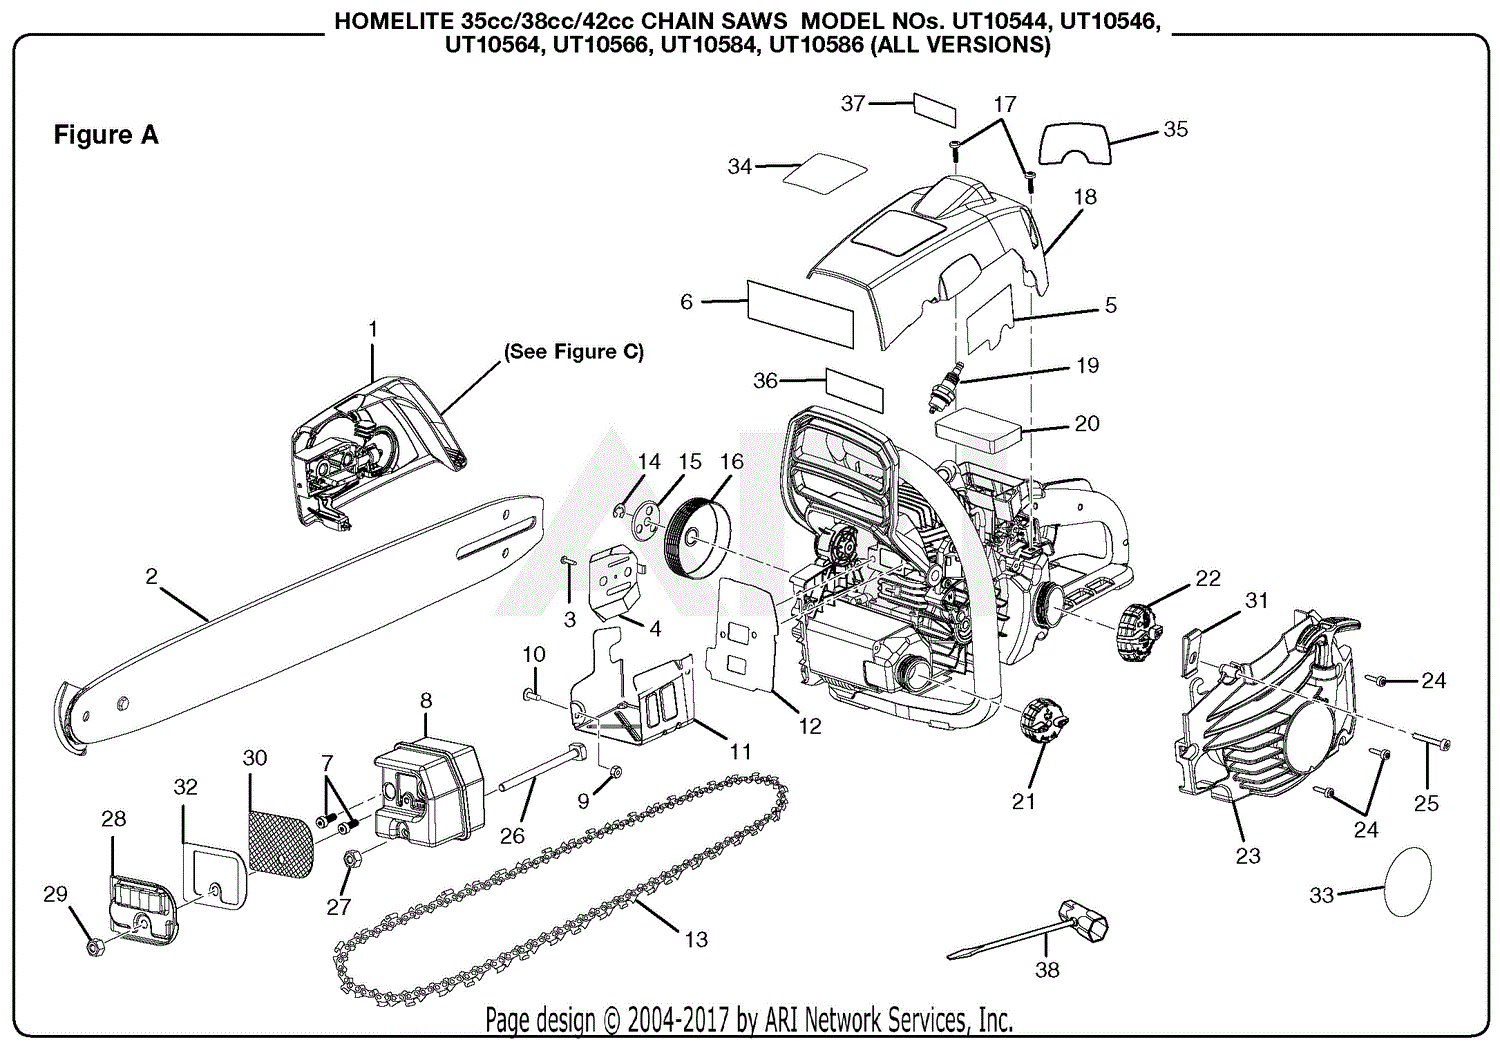 Homelite UT10544 14 in. 35cc Chain Saw Parts Diagram for Figure A